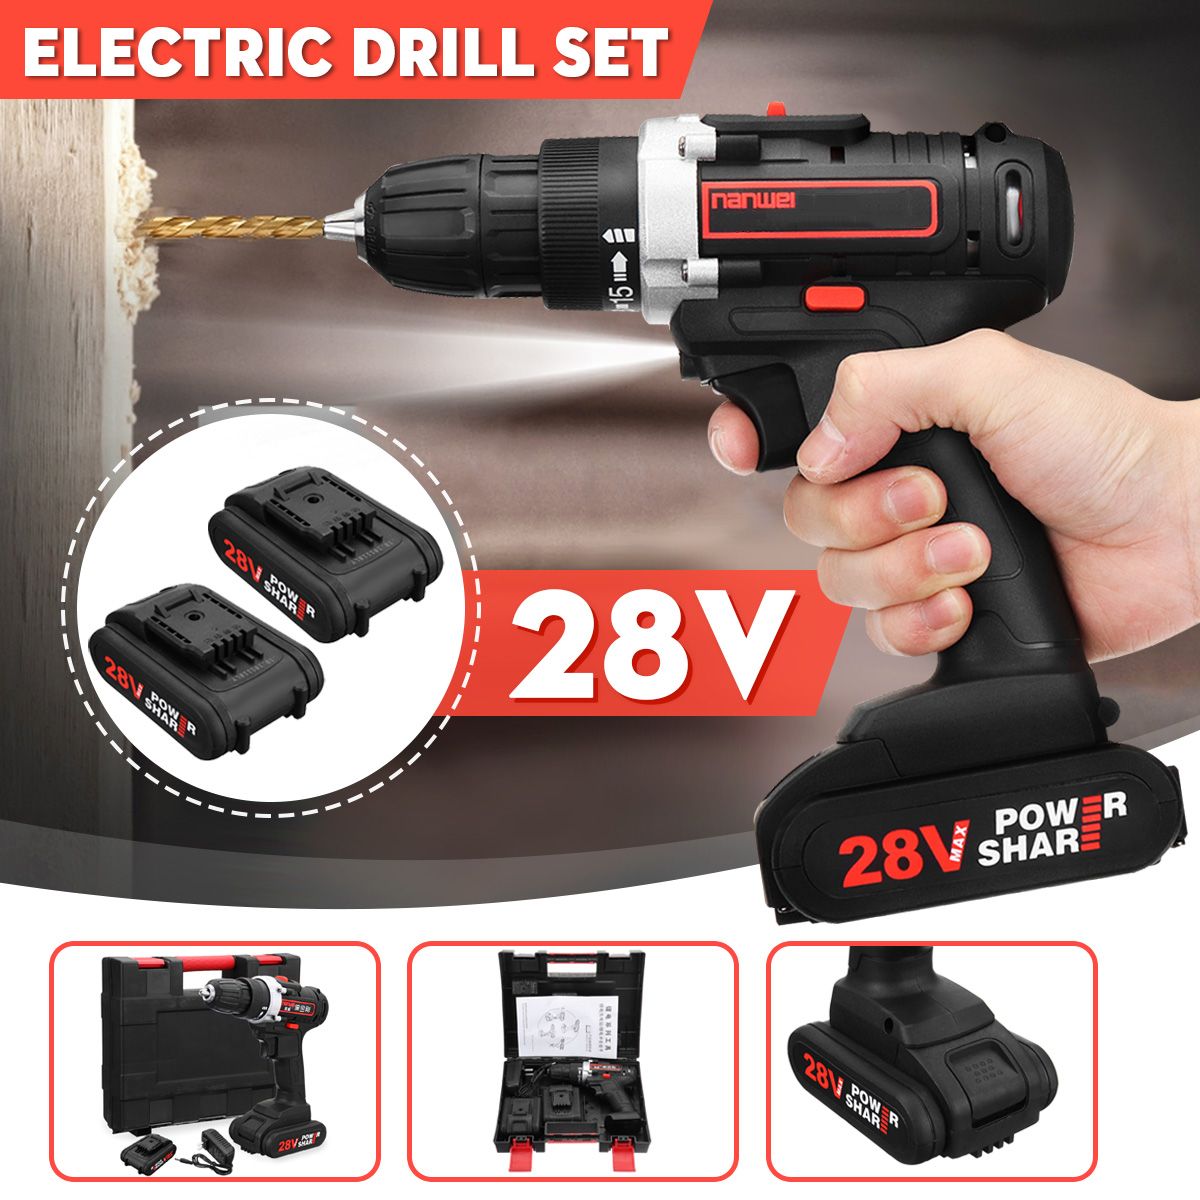 28V-Cordless-Power-Drills-Double-Speed-Electric-Drill-W-1-or-2-Li-ion-Battery-1413650